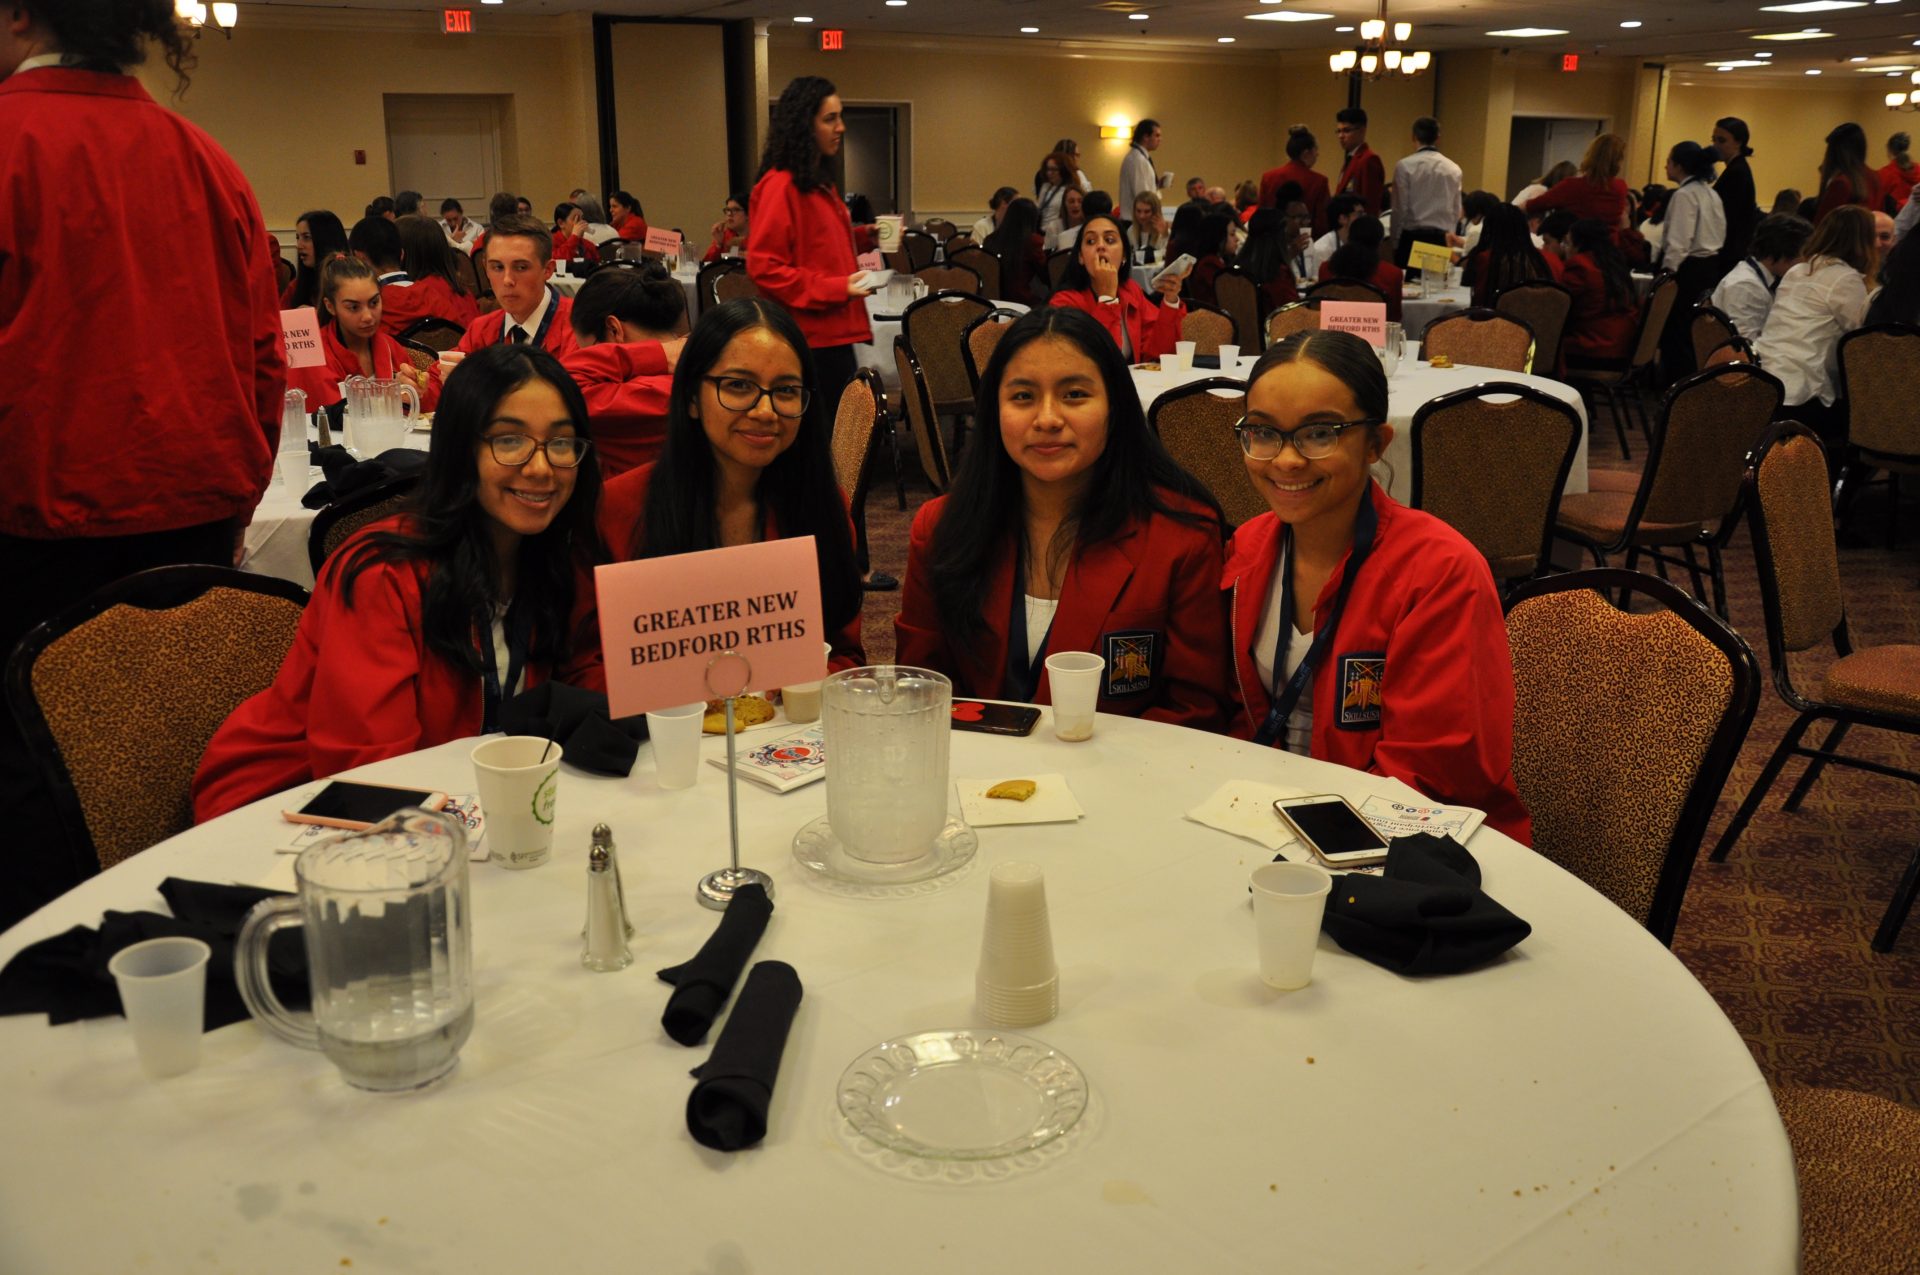 Skills USA students posing at the dinner table